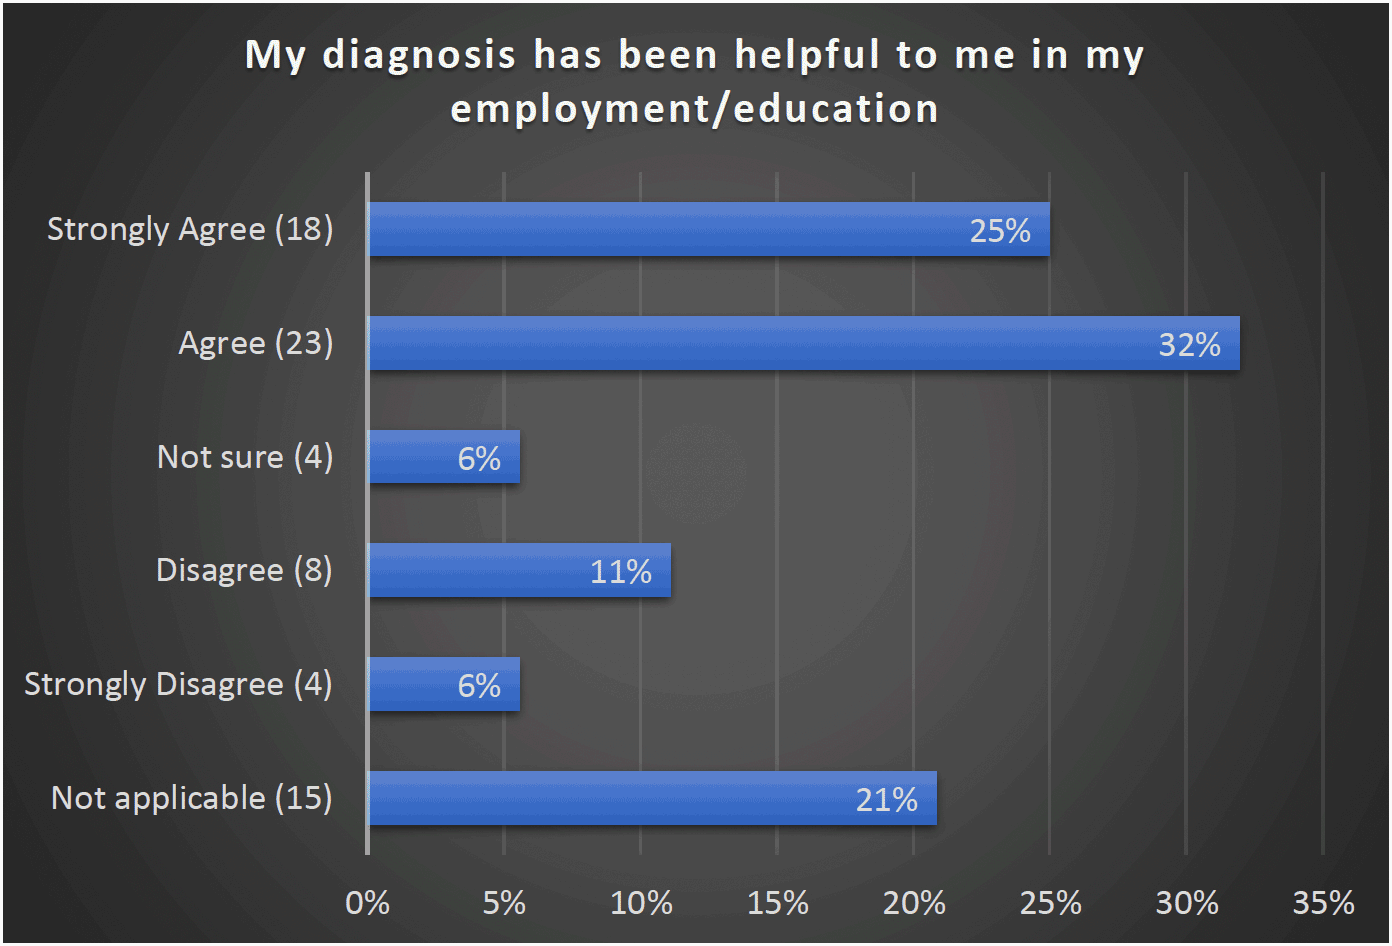 My diagnosis has been helpful to me in my employment/education - Strongly Agree (18) 25%, Agree (23) 32%, Not sure (4) 6%, Disagree (8) 11%, Strongly Disagree (4) 6%, Not applicable (15) 21%